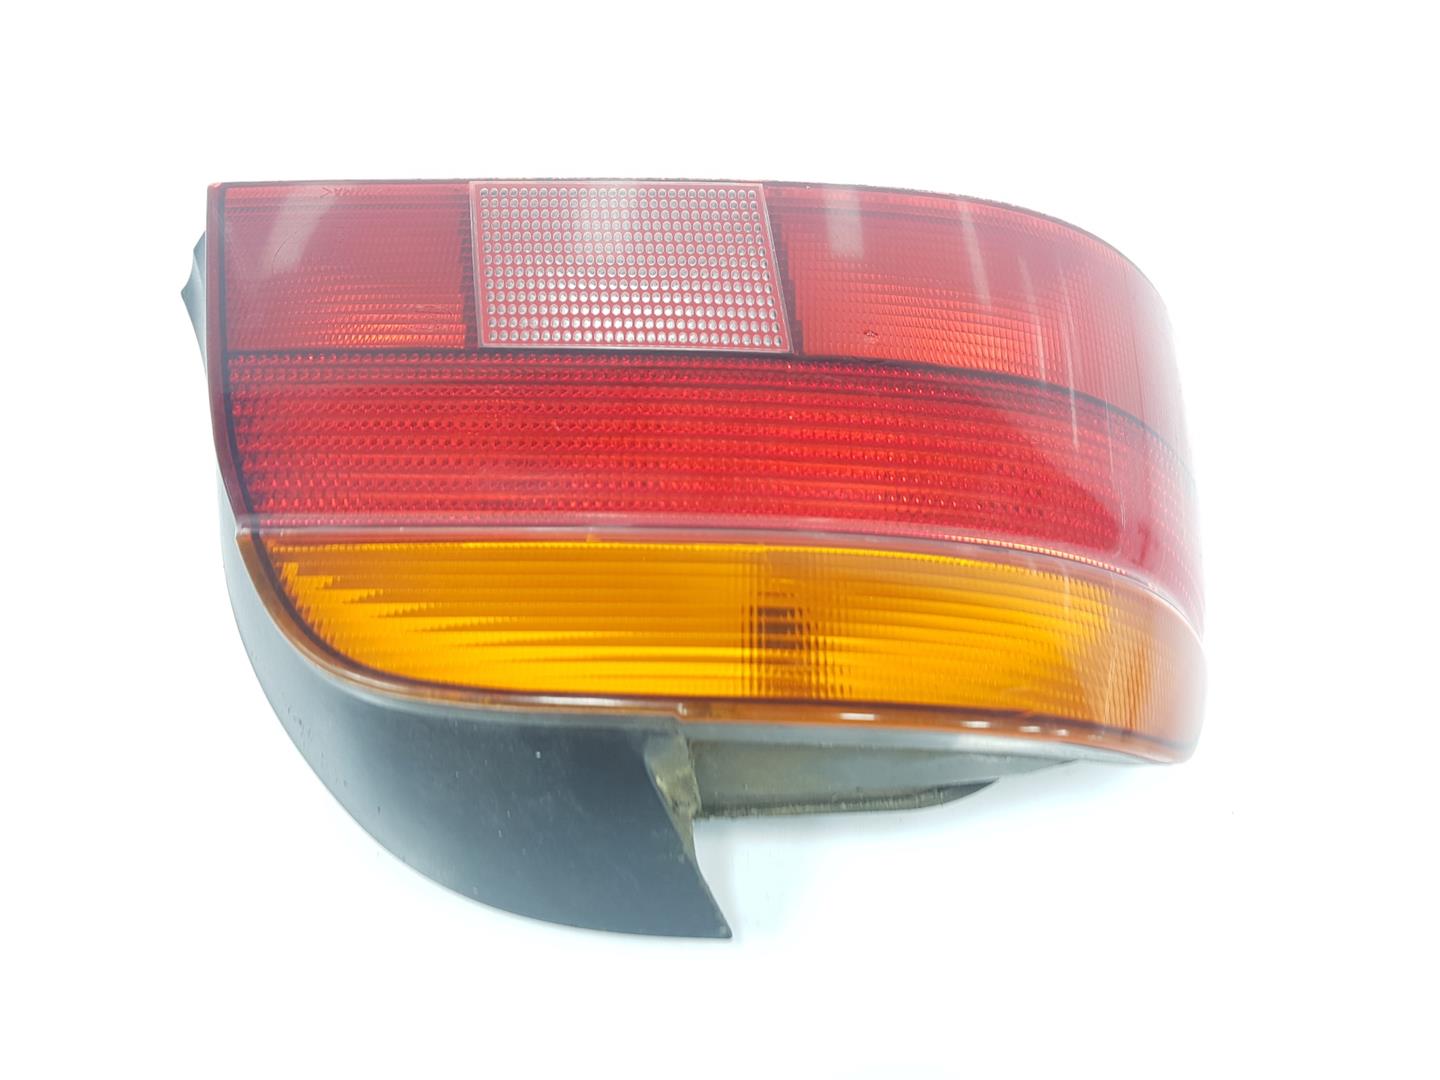 BMW 5 Series E39 (1995-2004) Rear Left Taillight 63218363557, 63218363557 24233626